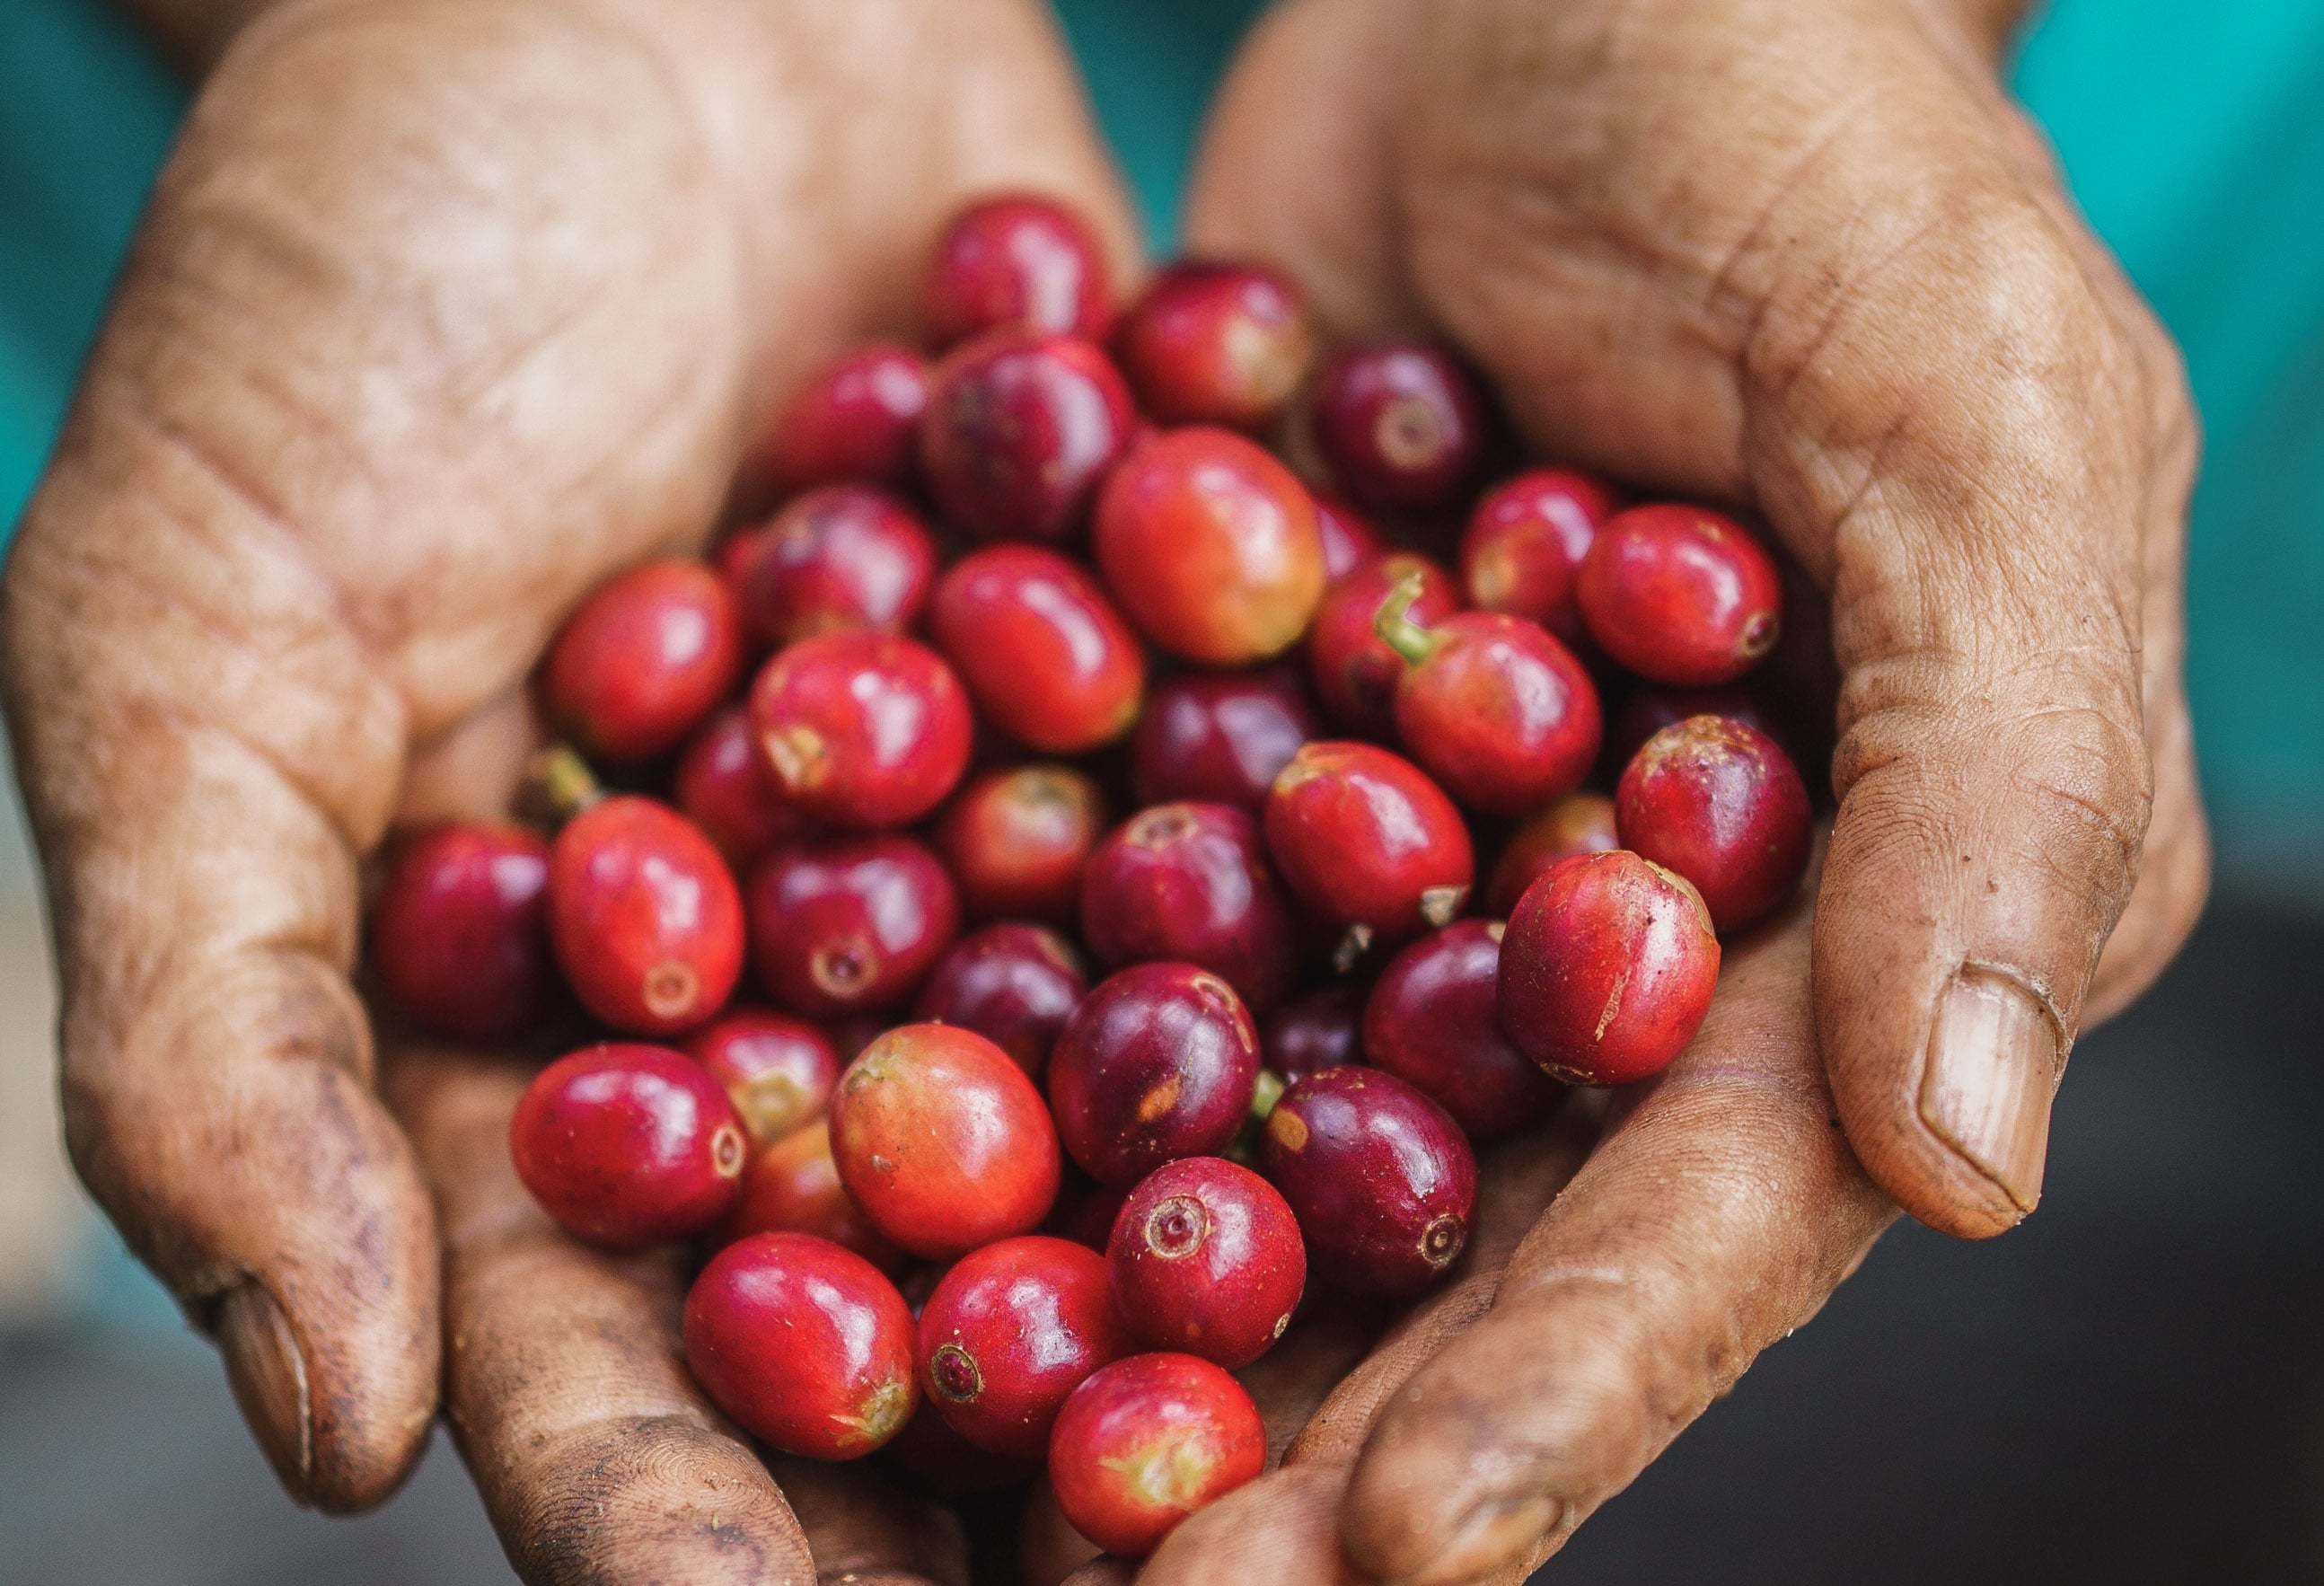 How Can You Tell the Quality of Coffee? Get to Know the Slow Process!